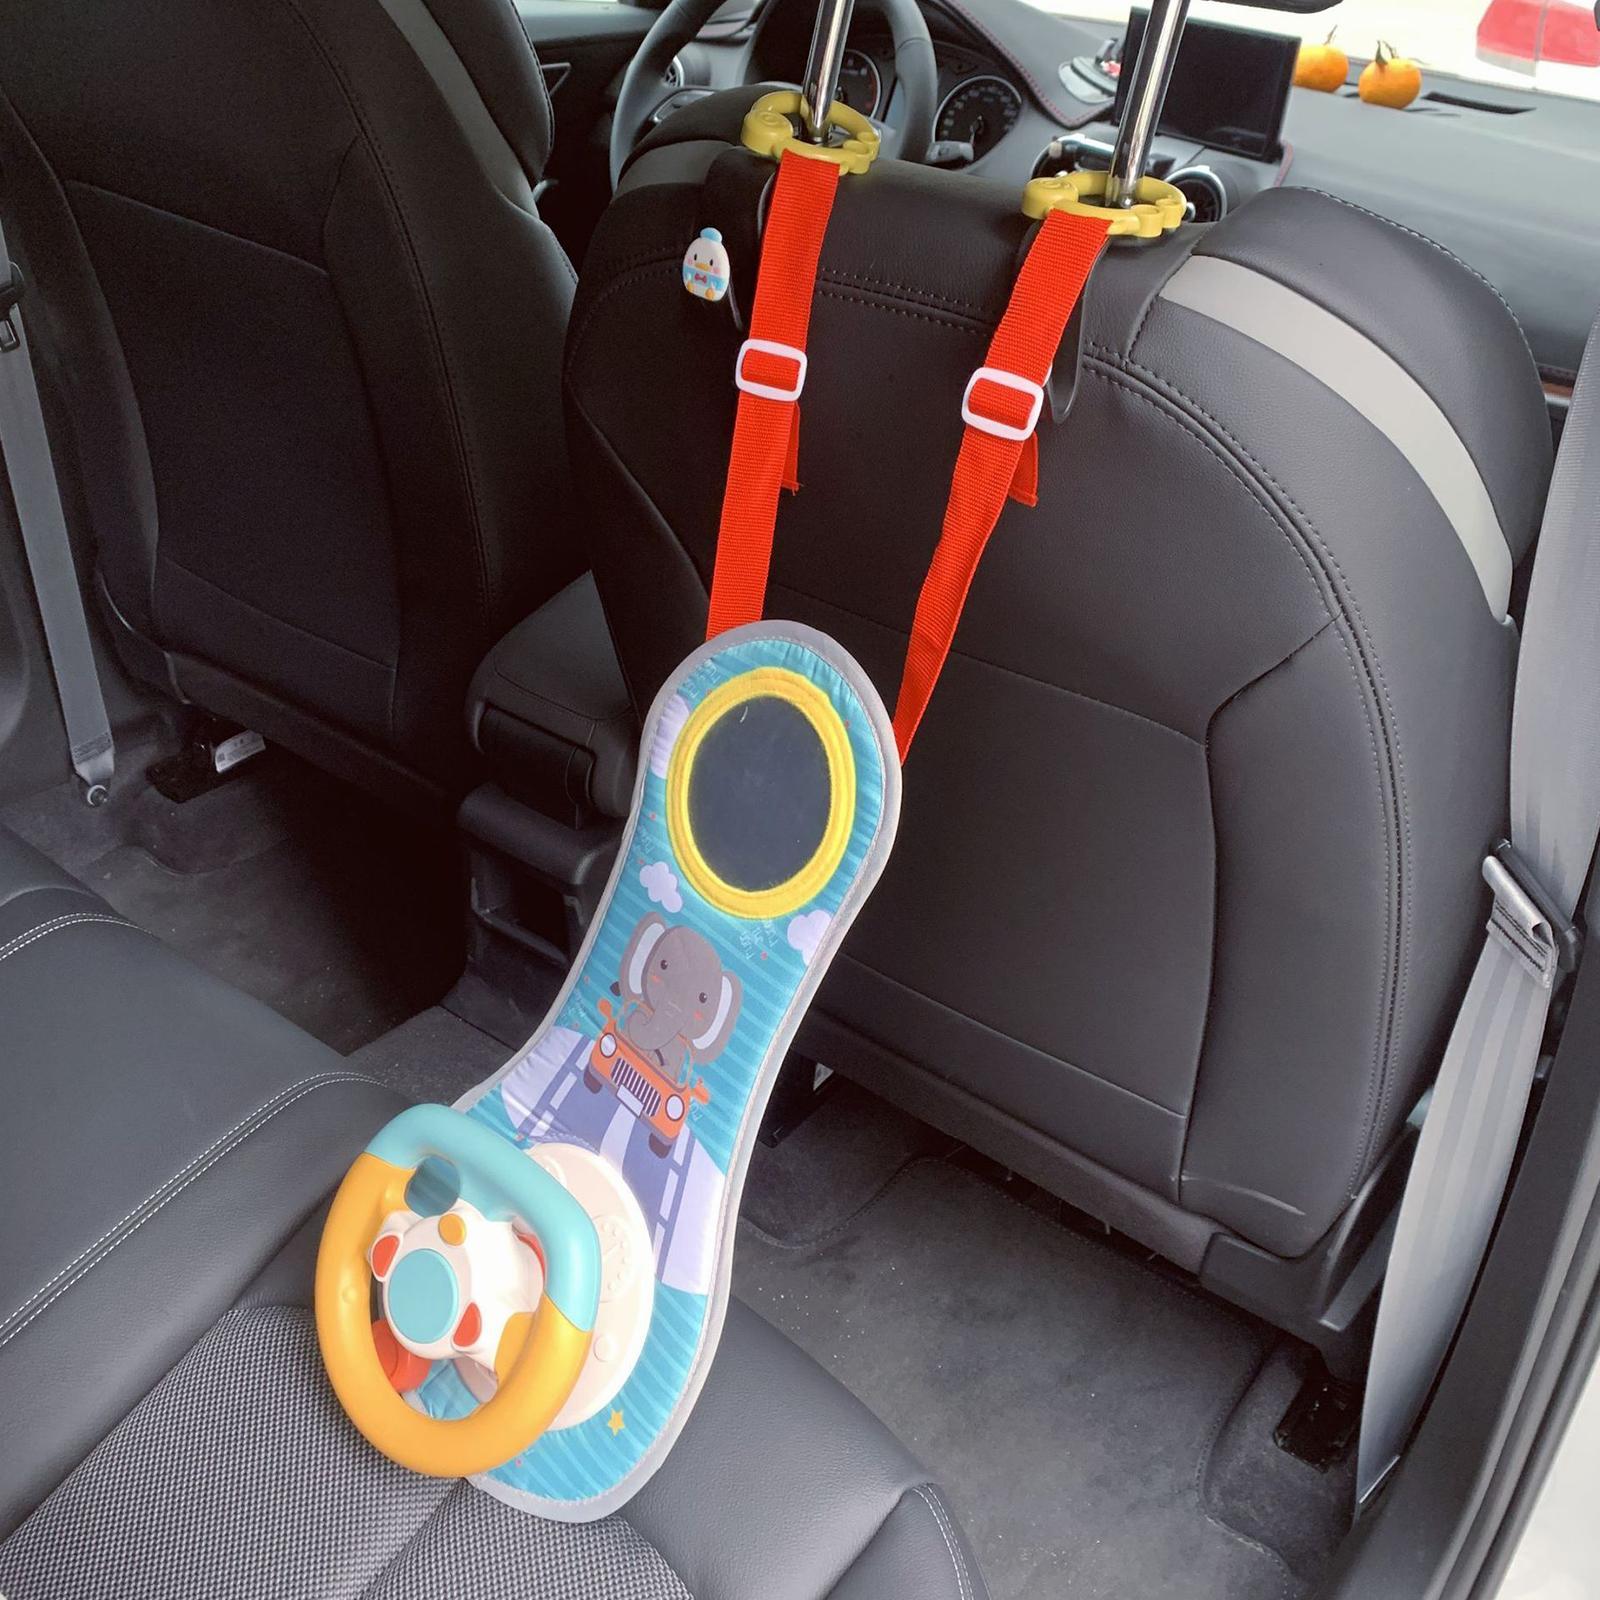 Steering Wheel Toy Activity Pretend Game for Backseat Infant Kids